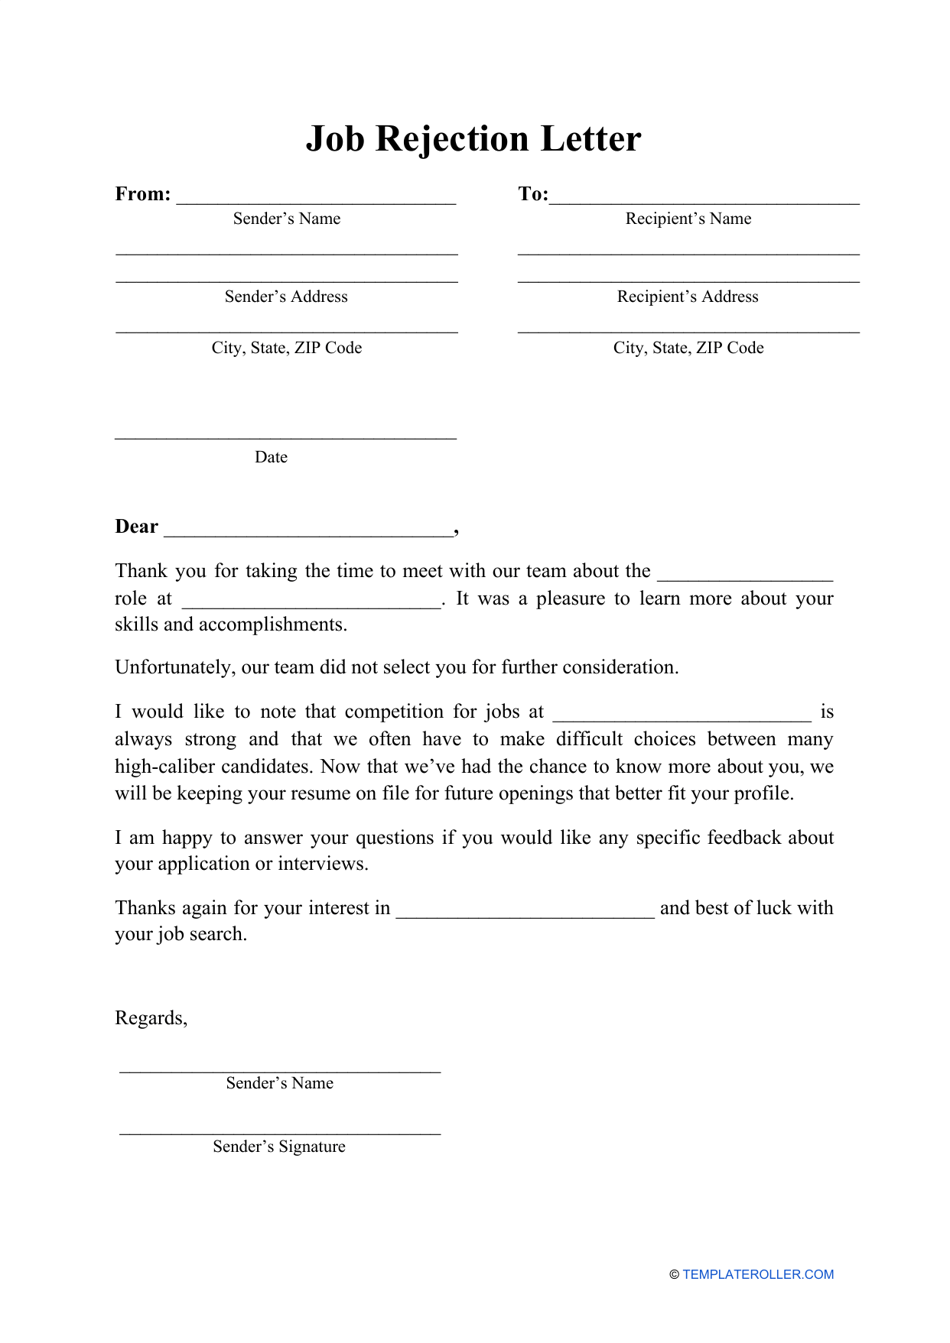 Job Rejection Letter Template, Page 1